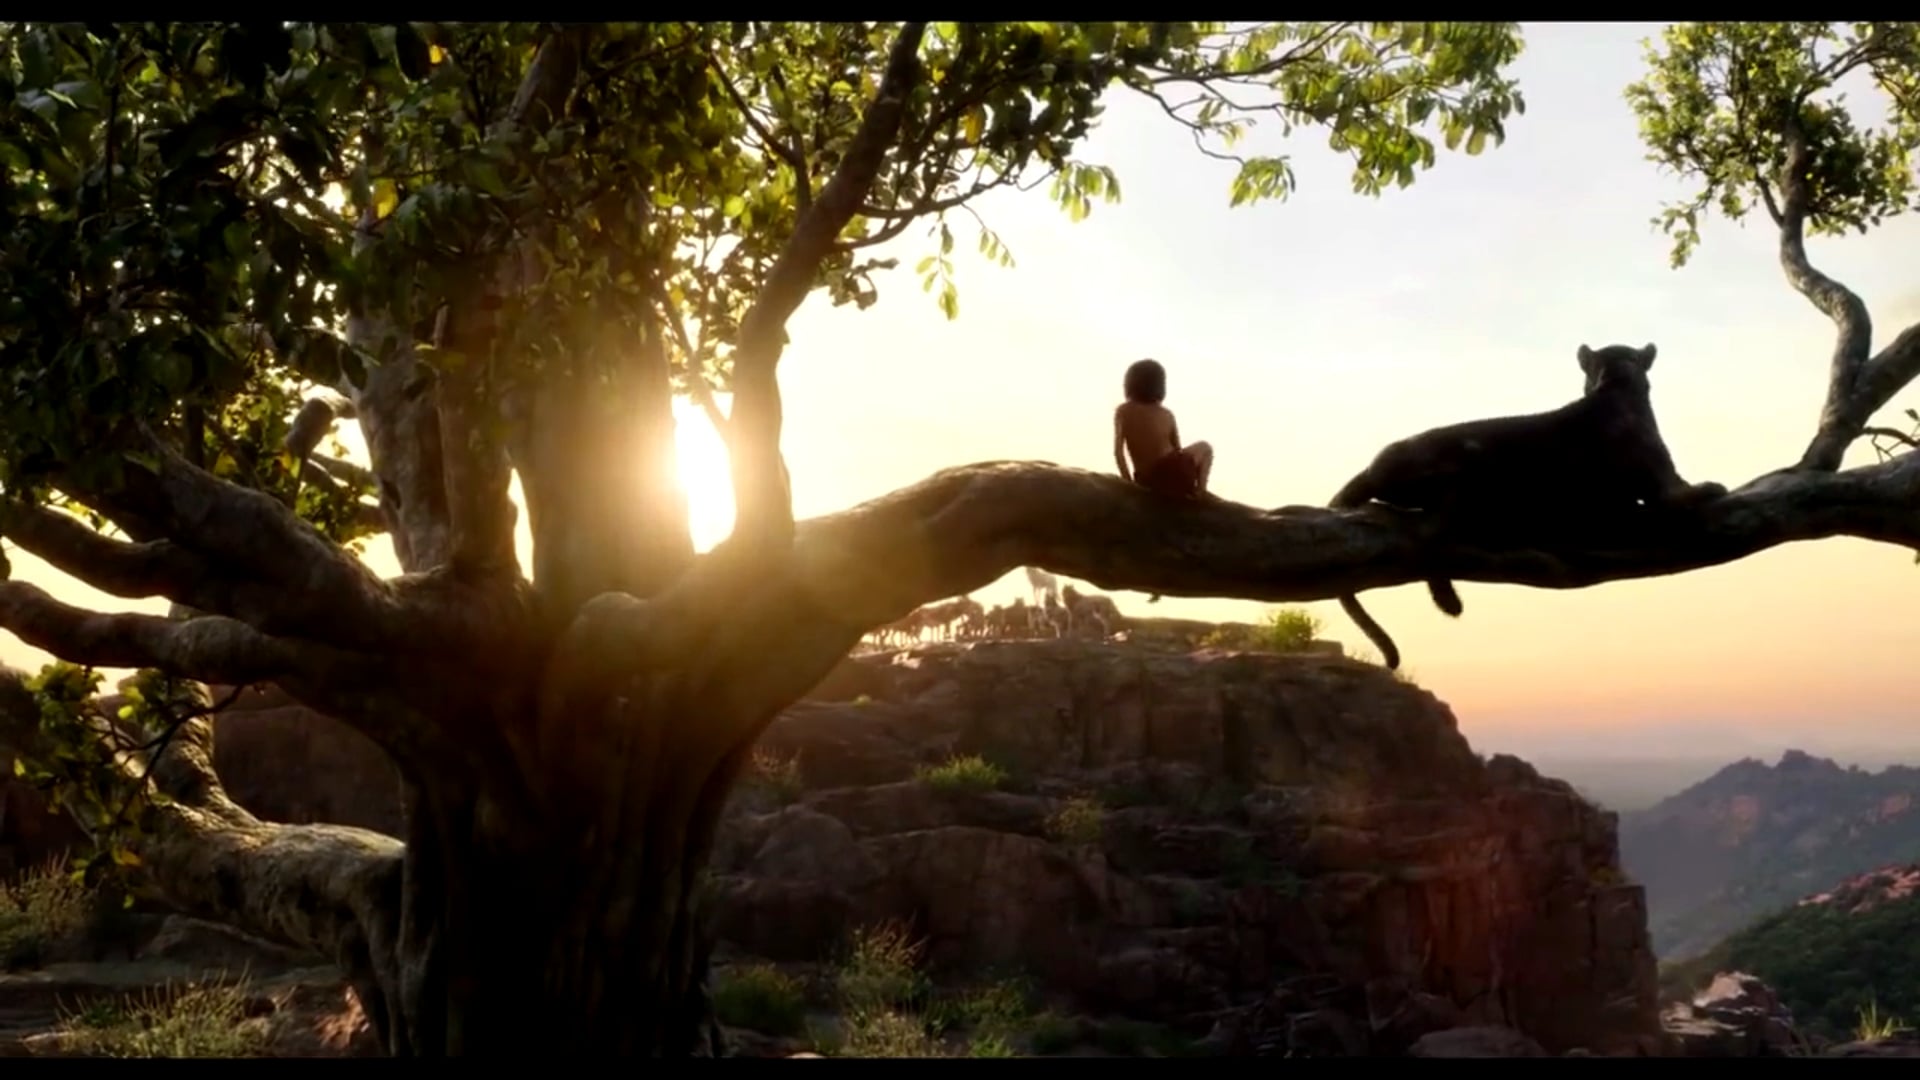 Behind the Scenes of The Jungle Book